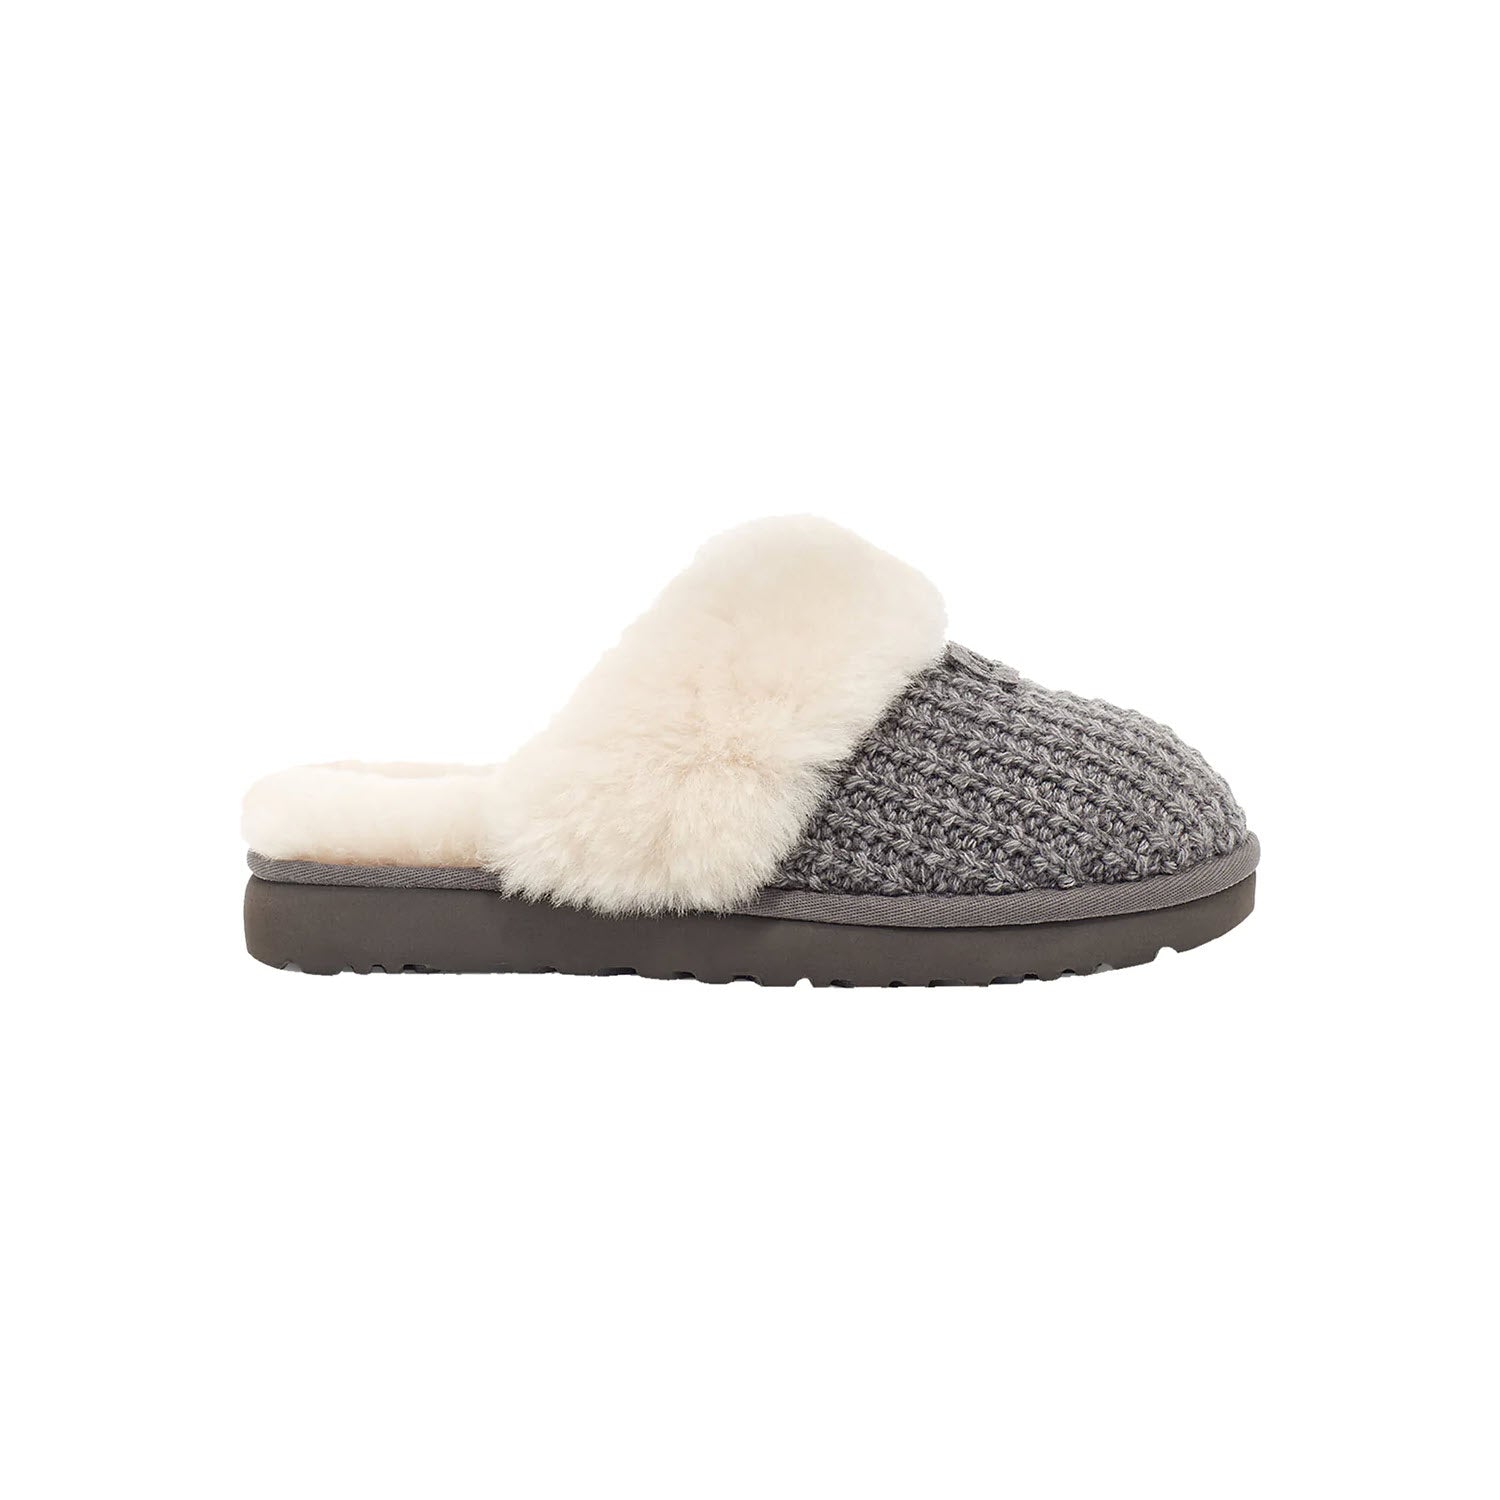 A gray knitted UGG Cozy Knit Charcoal women's slipper with a plush white sheepskin collar and a dark rubber sole, displayed against a white background.